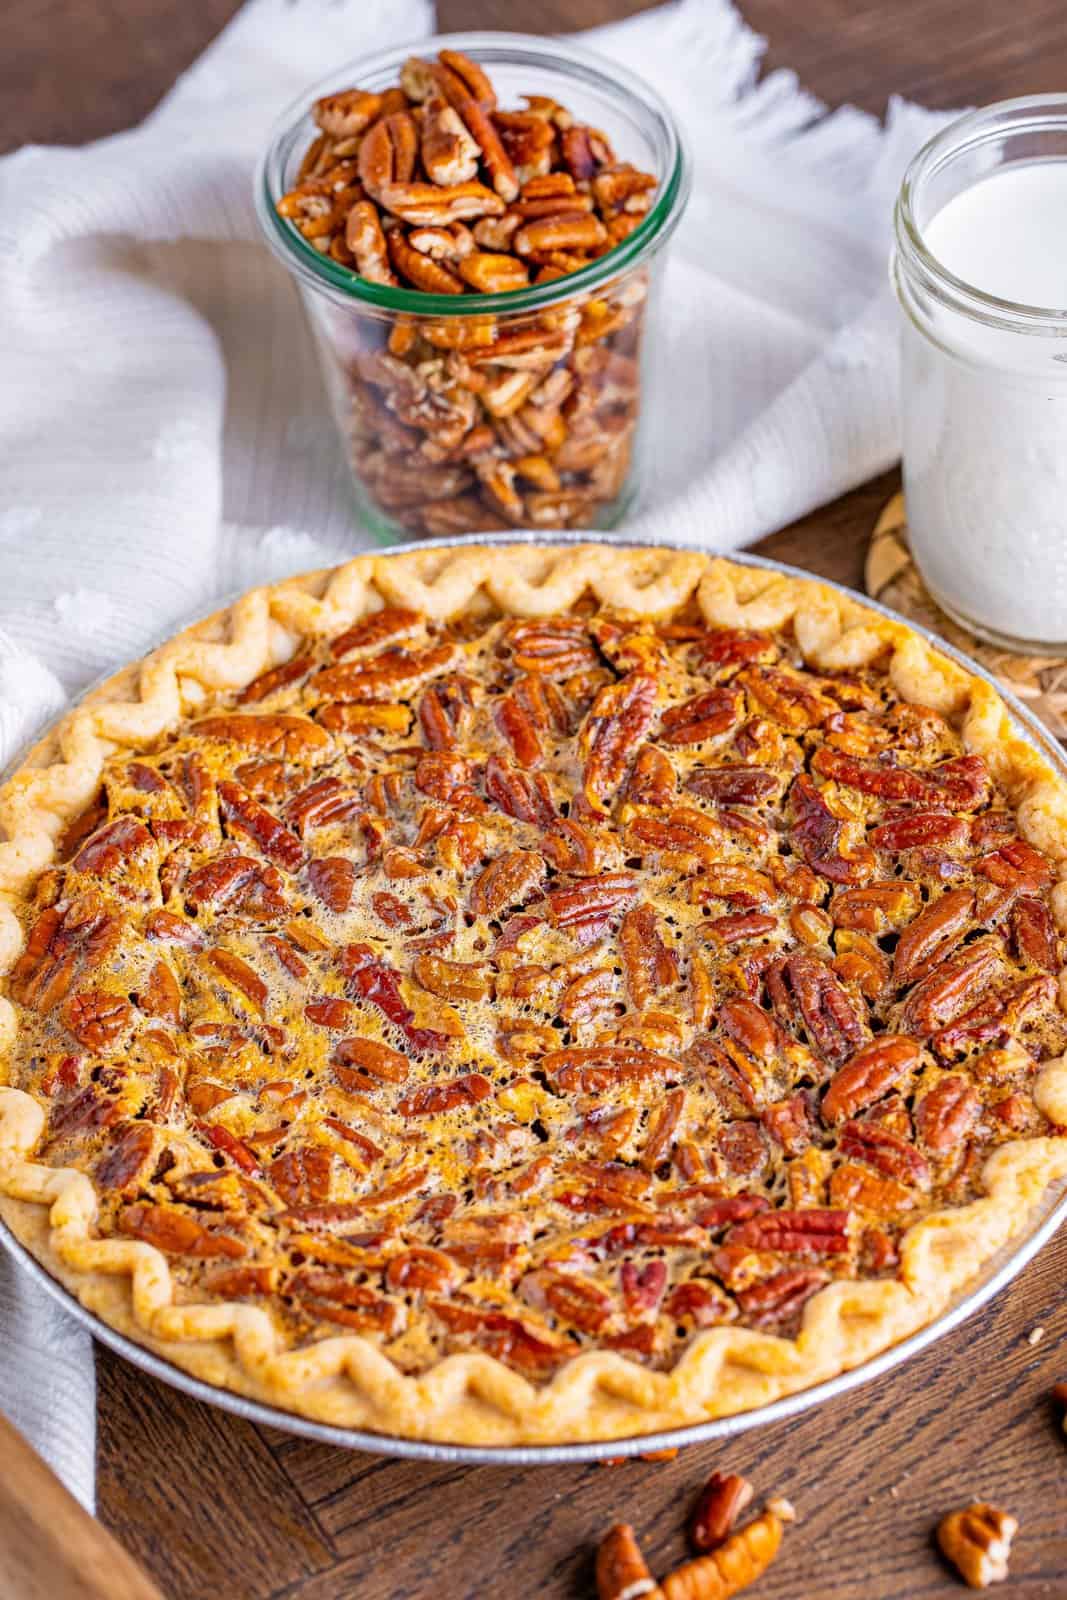 fully cooked pecan pie on a wooden surface.